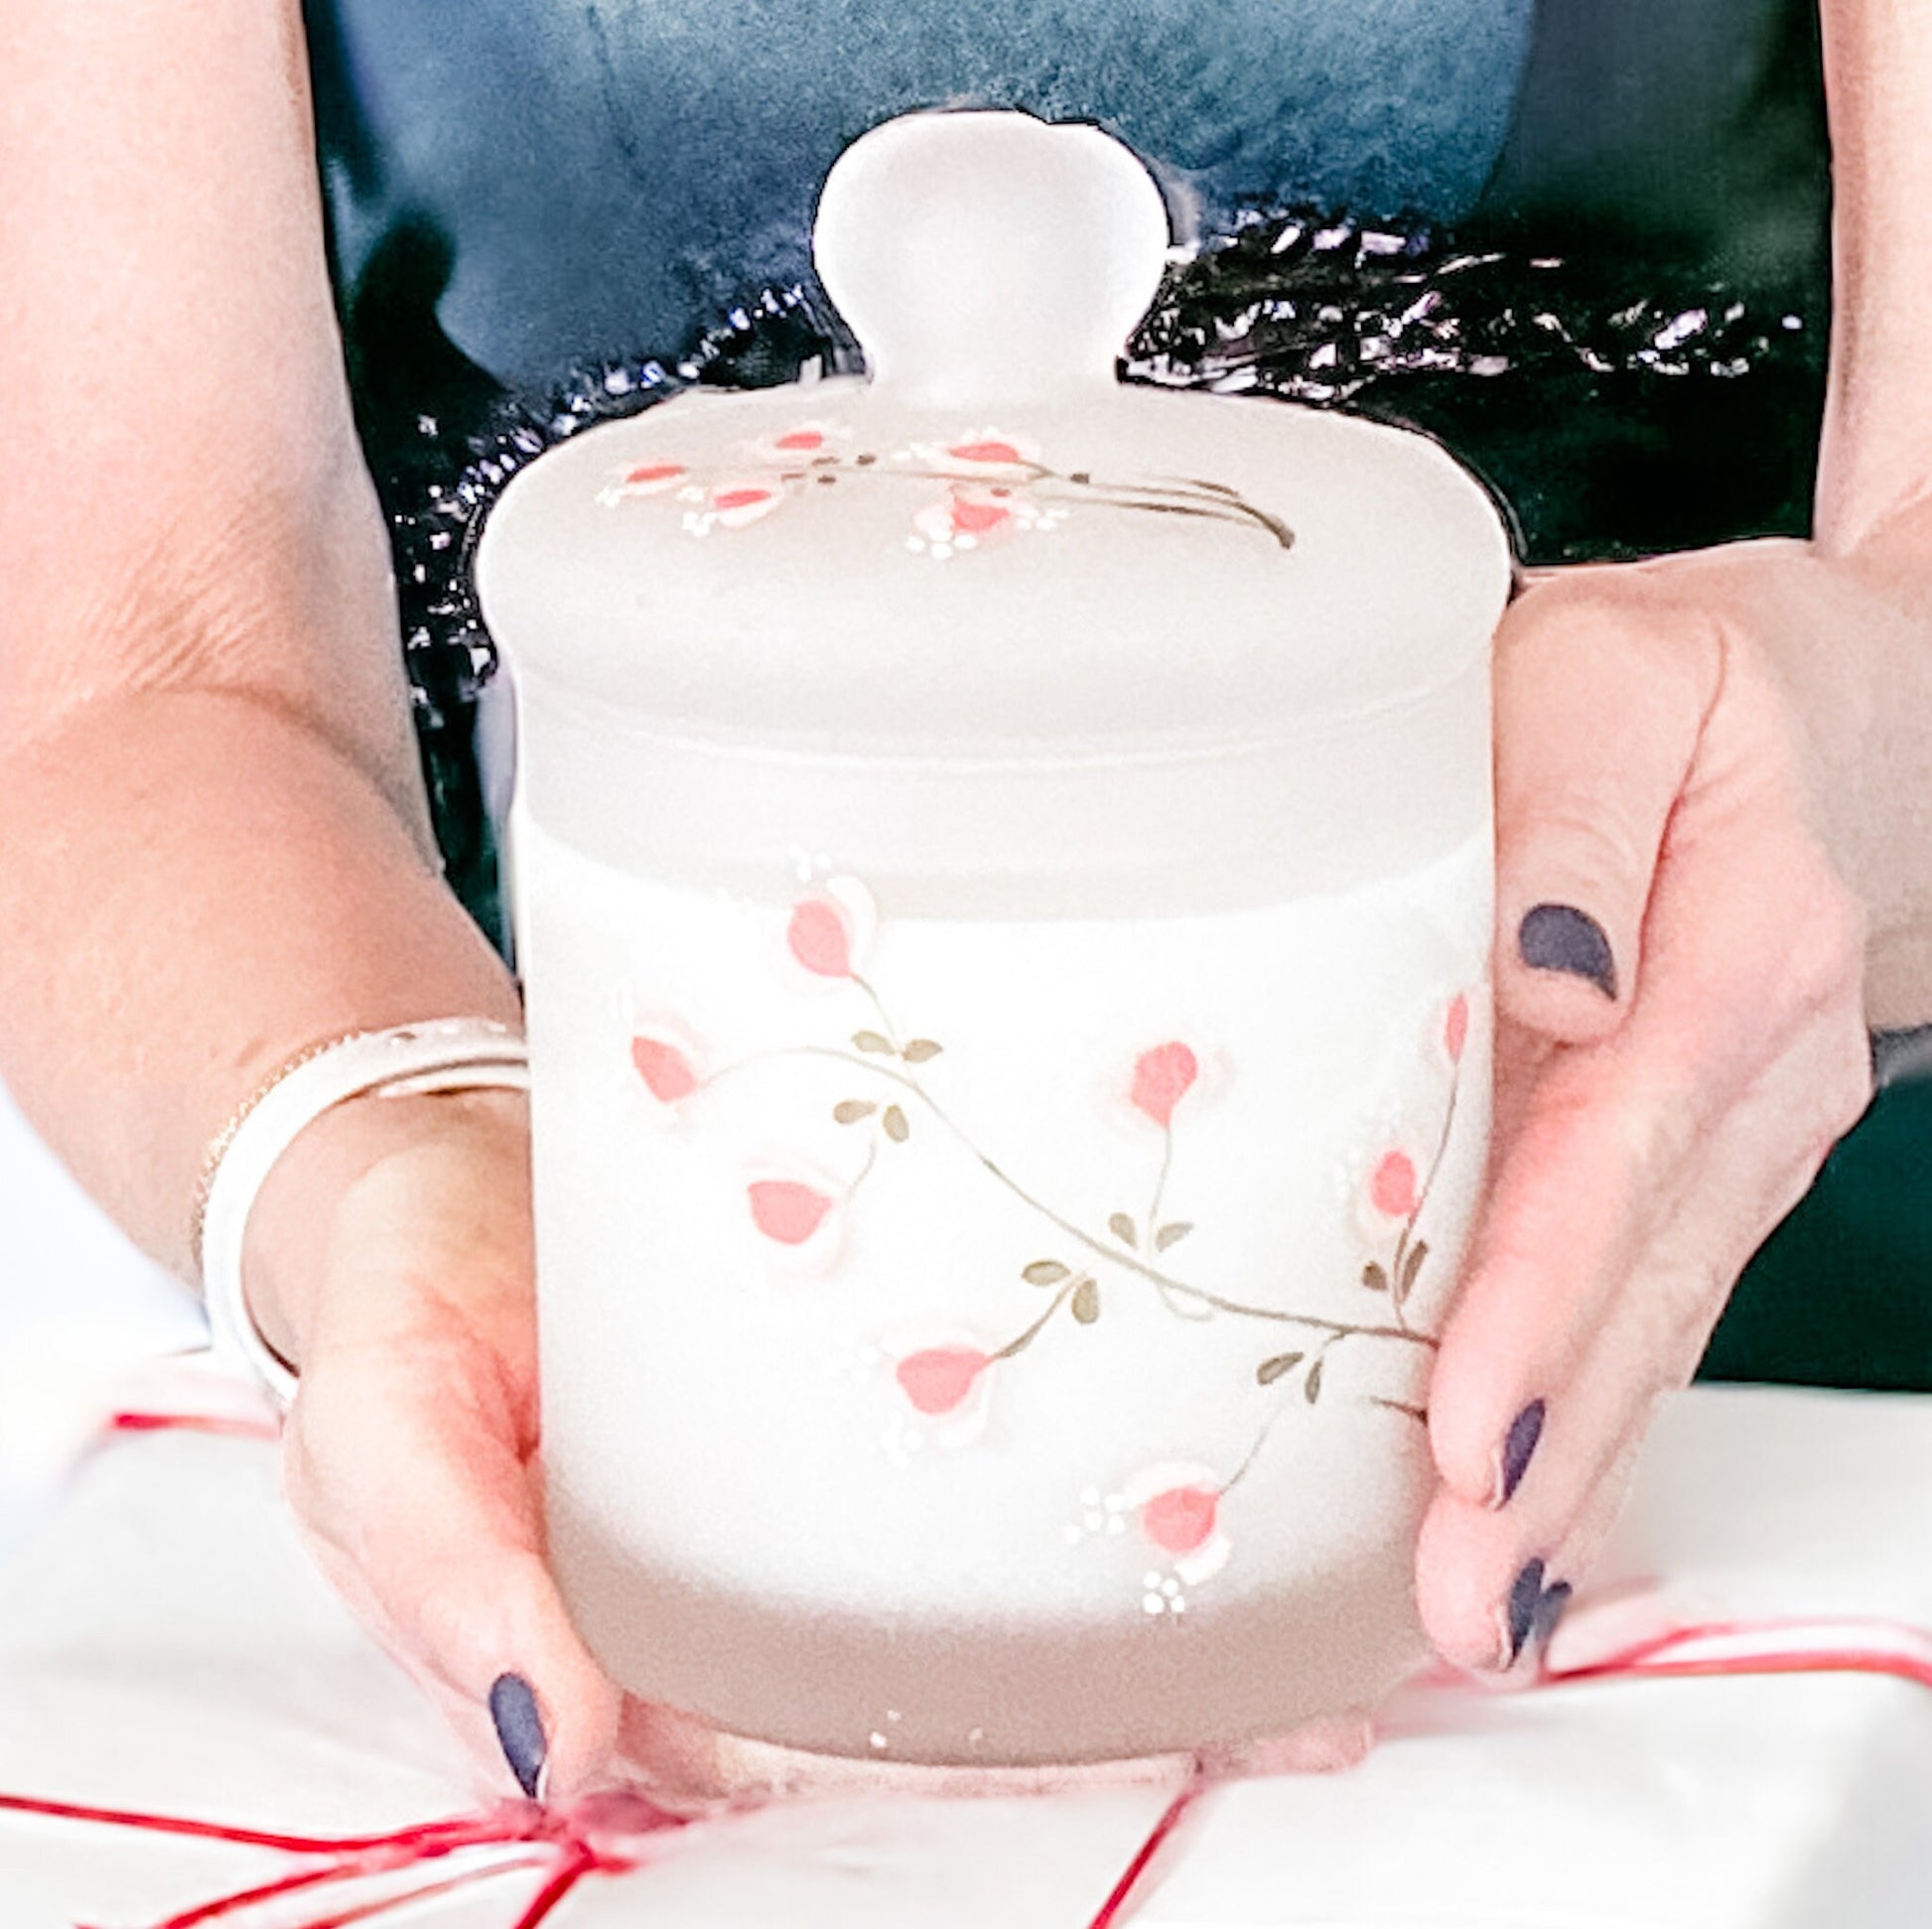 Orchid Whisper Vintage Candle | Hand-Painted Frosted Glass Jar